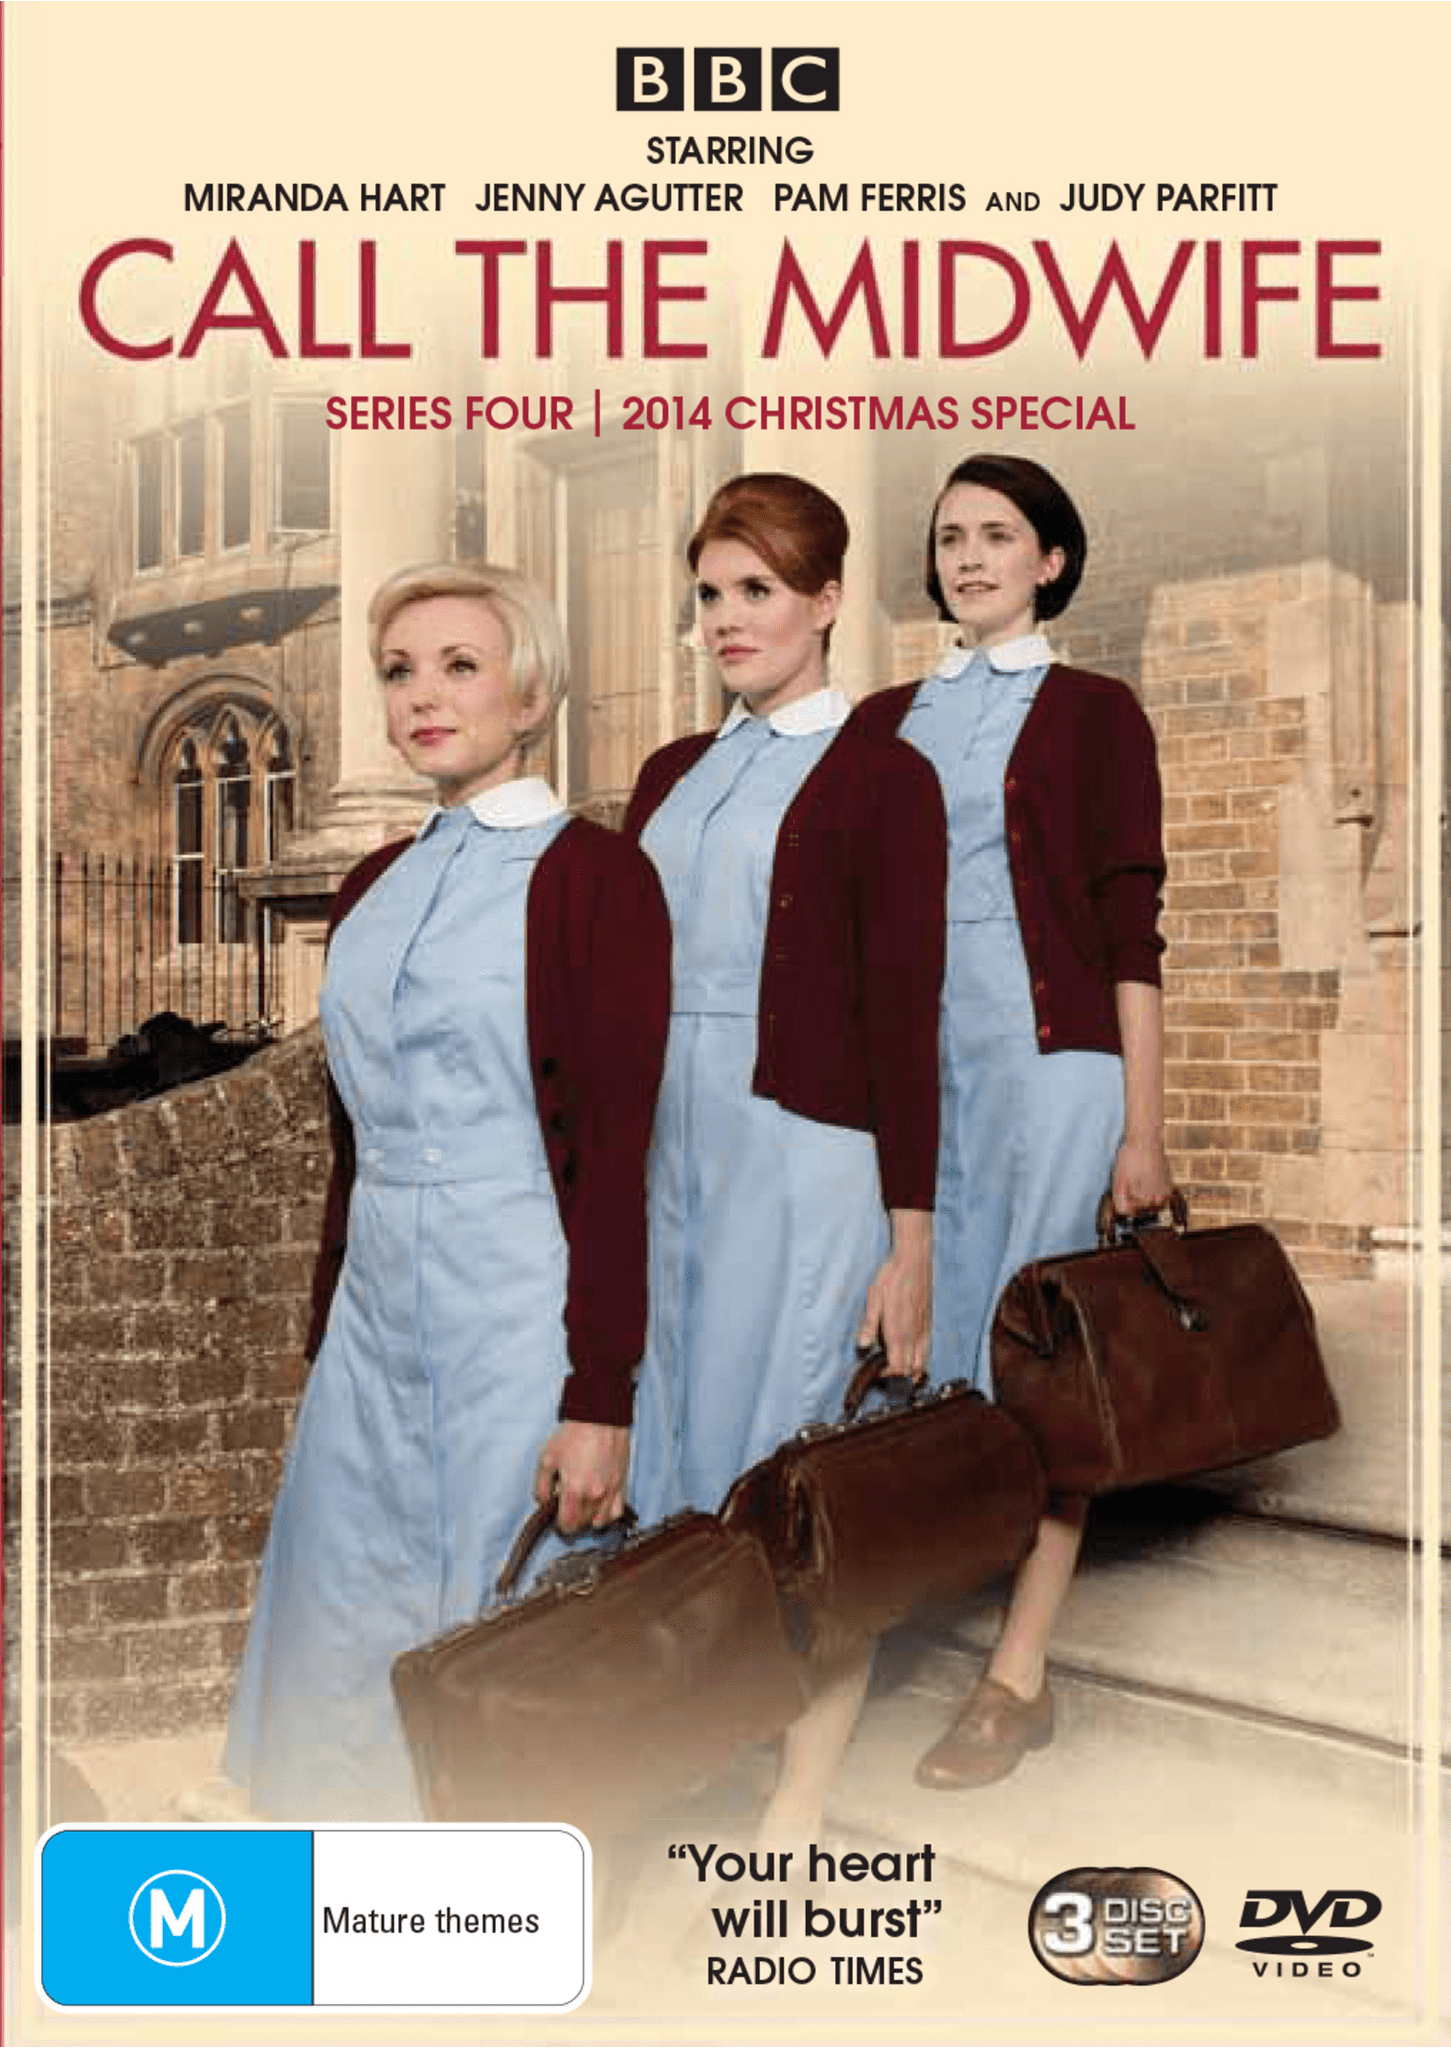 CALL THE MIDWIFE: SERIES 4